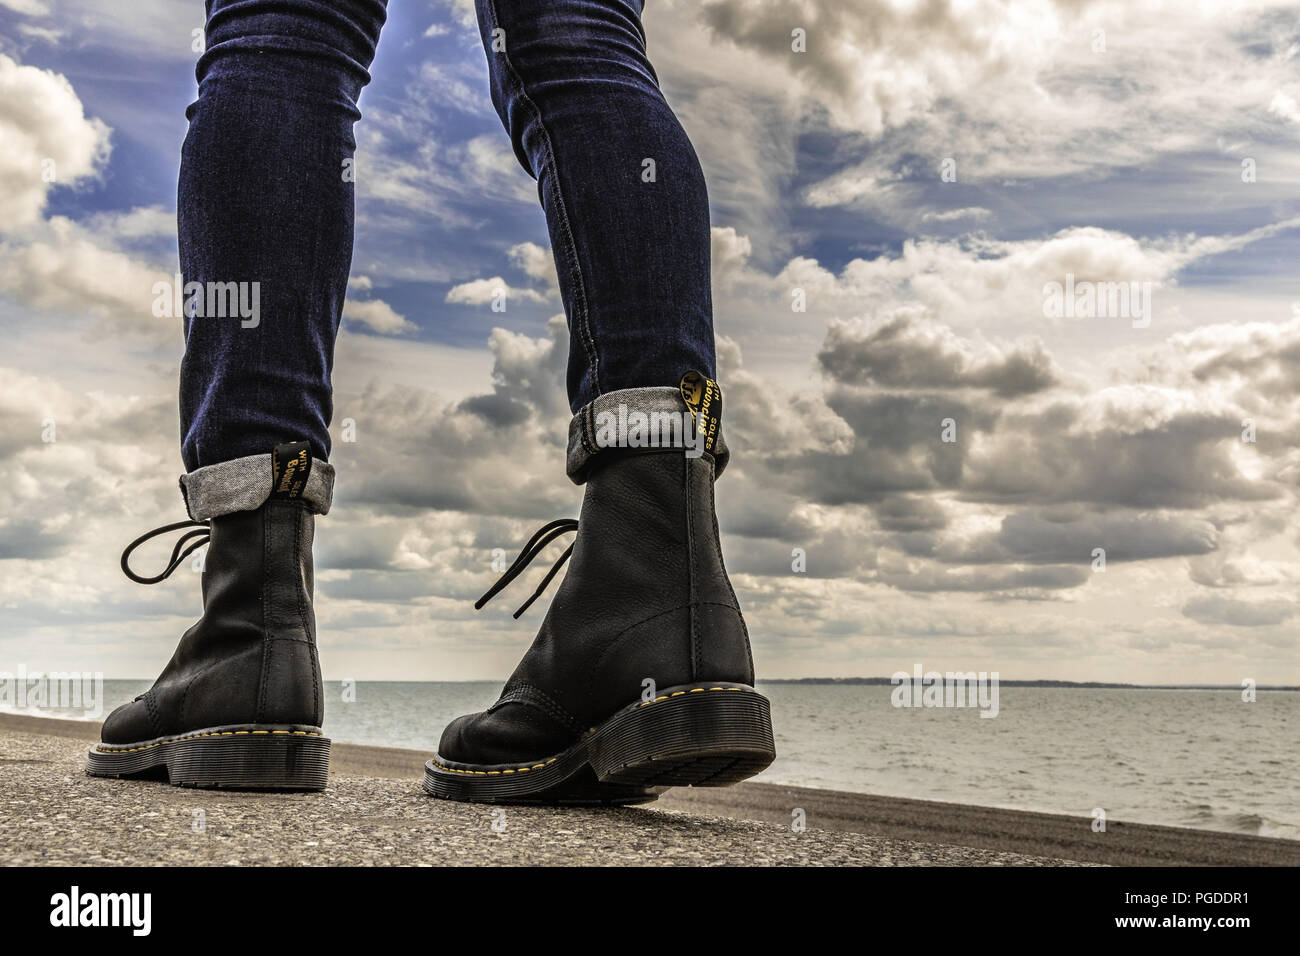 doc marten boots with jeans